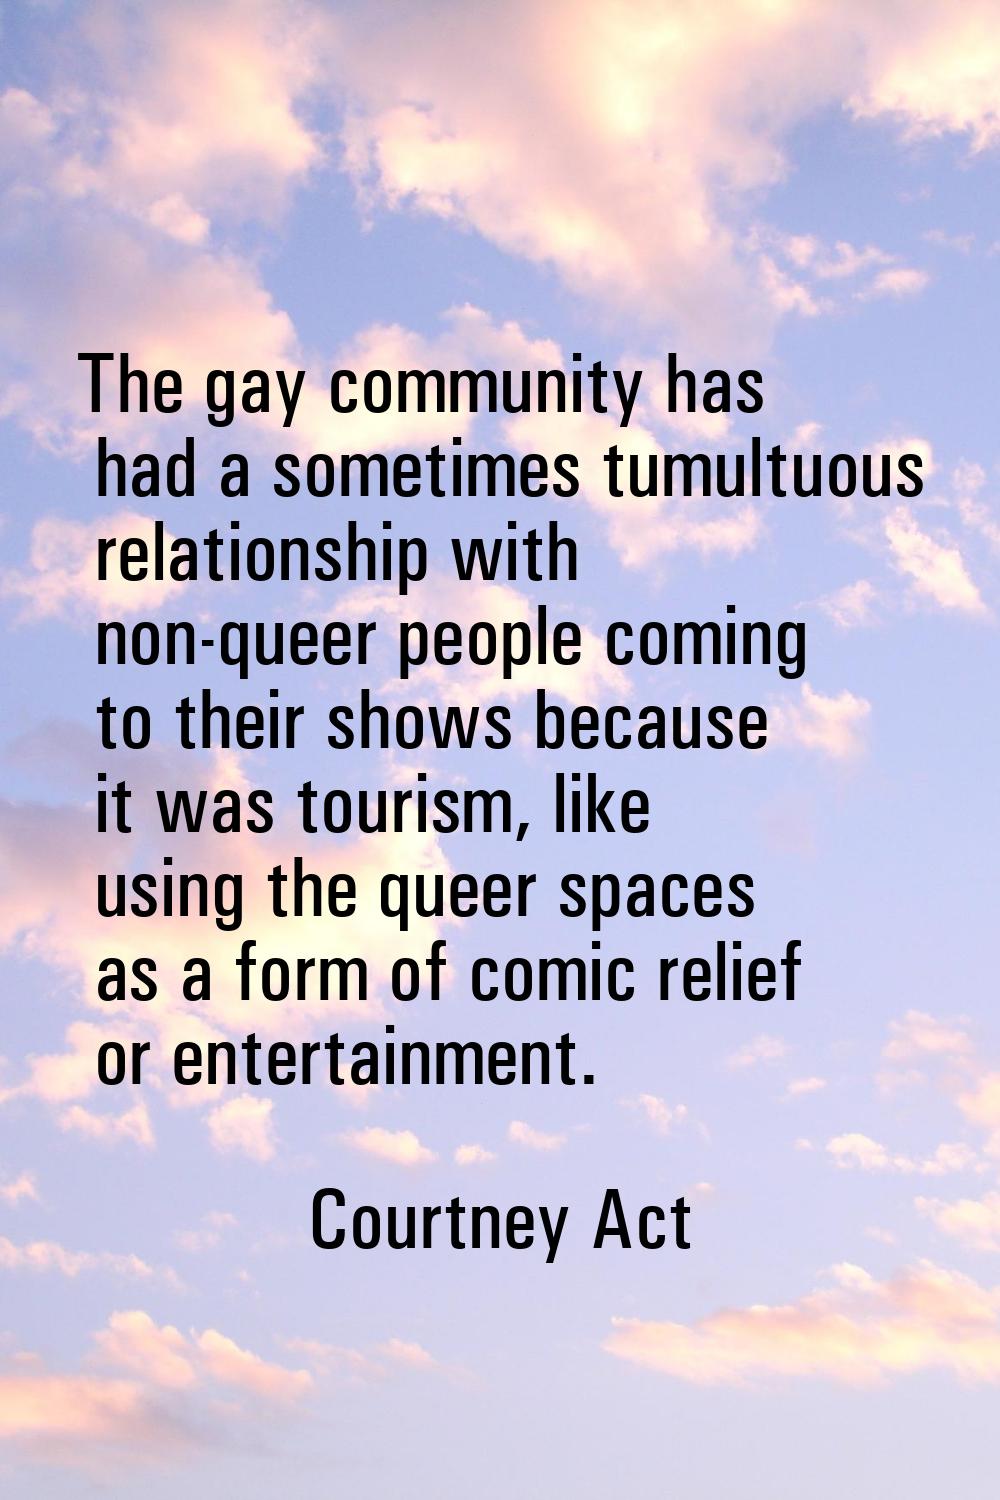 The gay community has had a sometimes tumultuous relationship with non-queer people coming to their